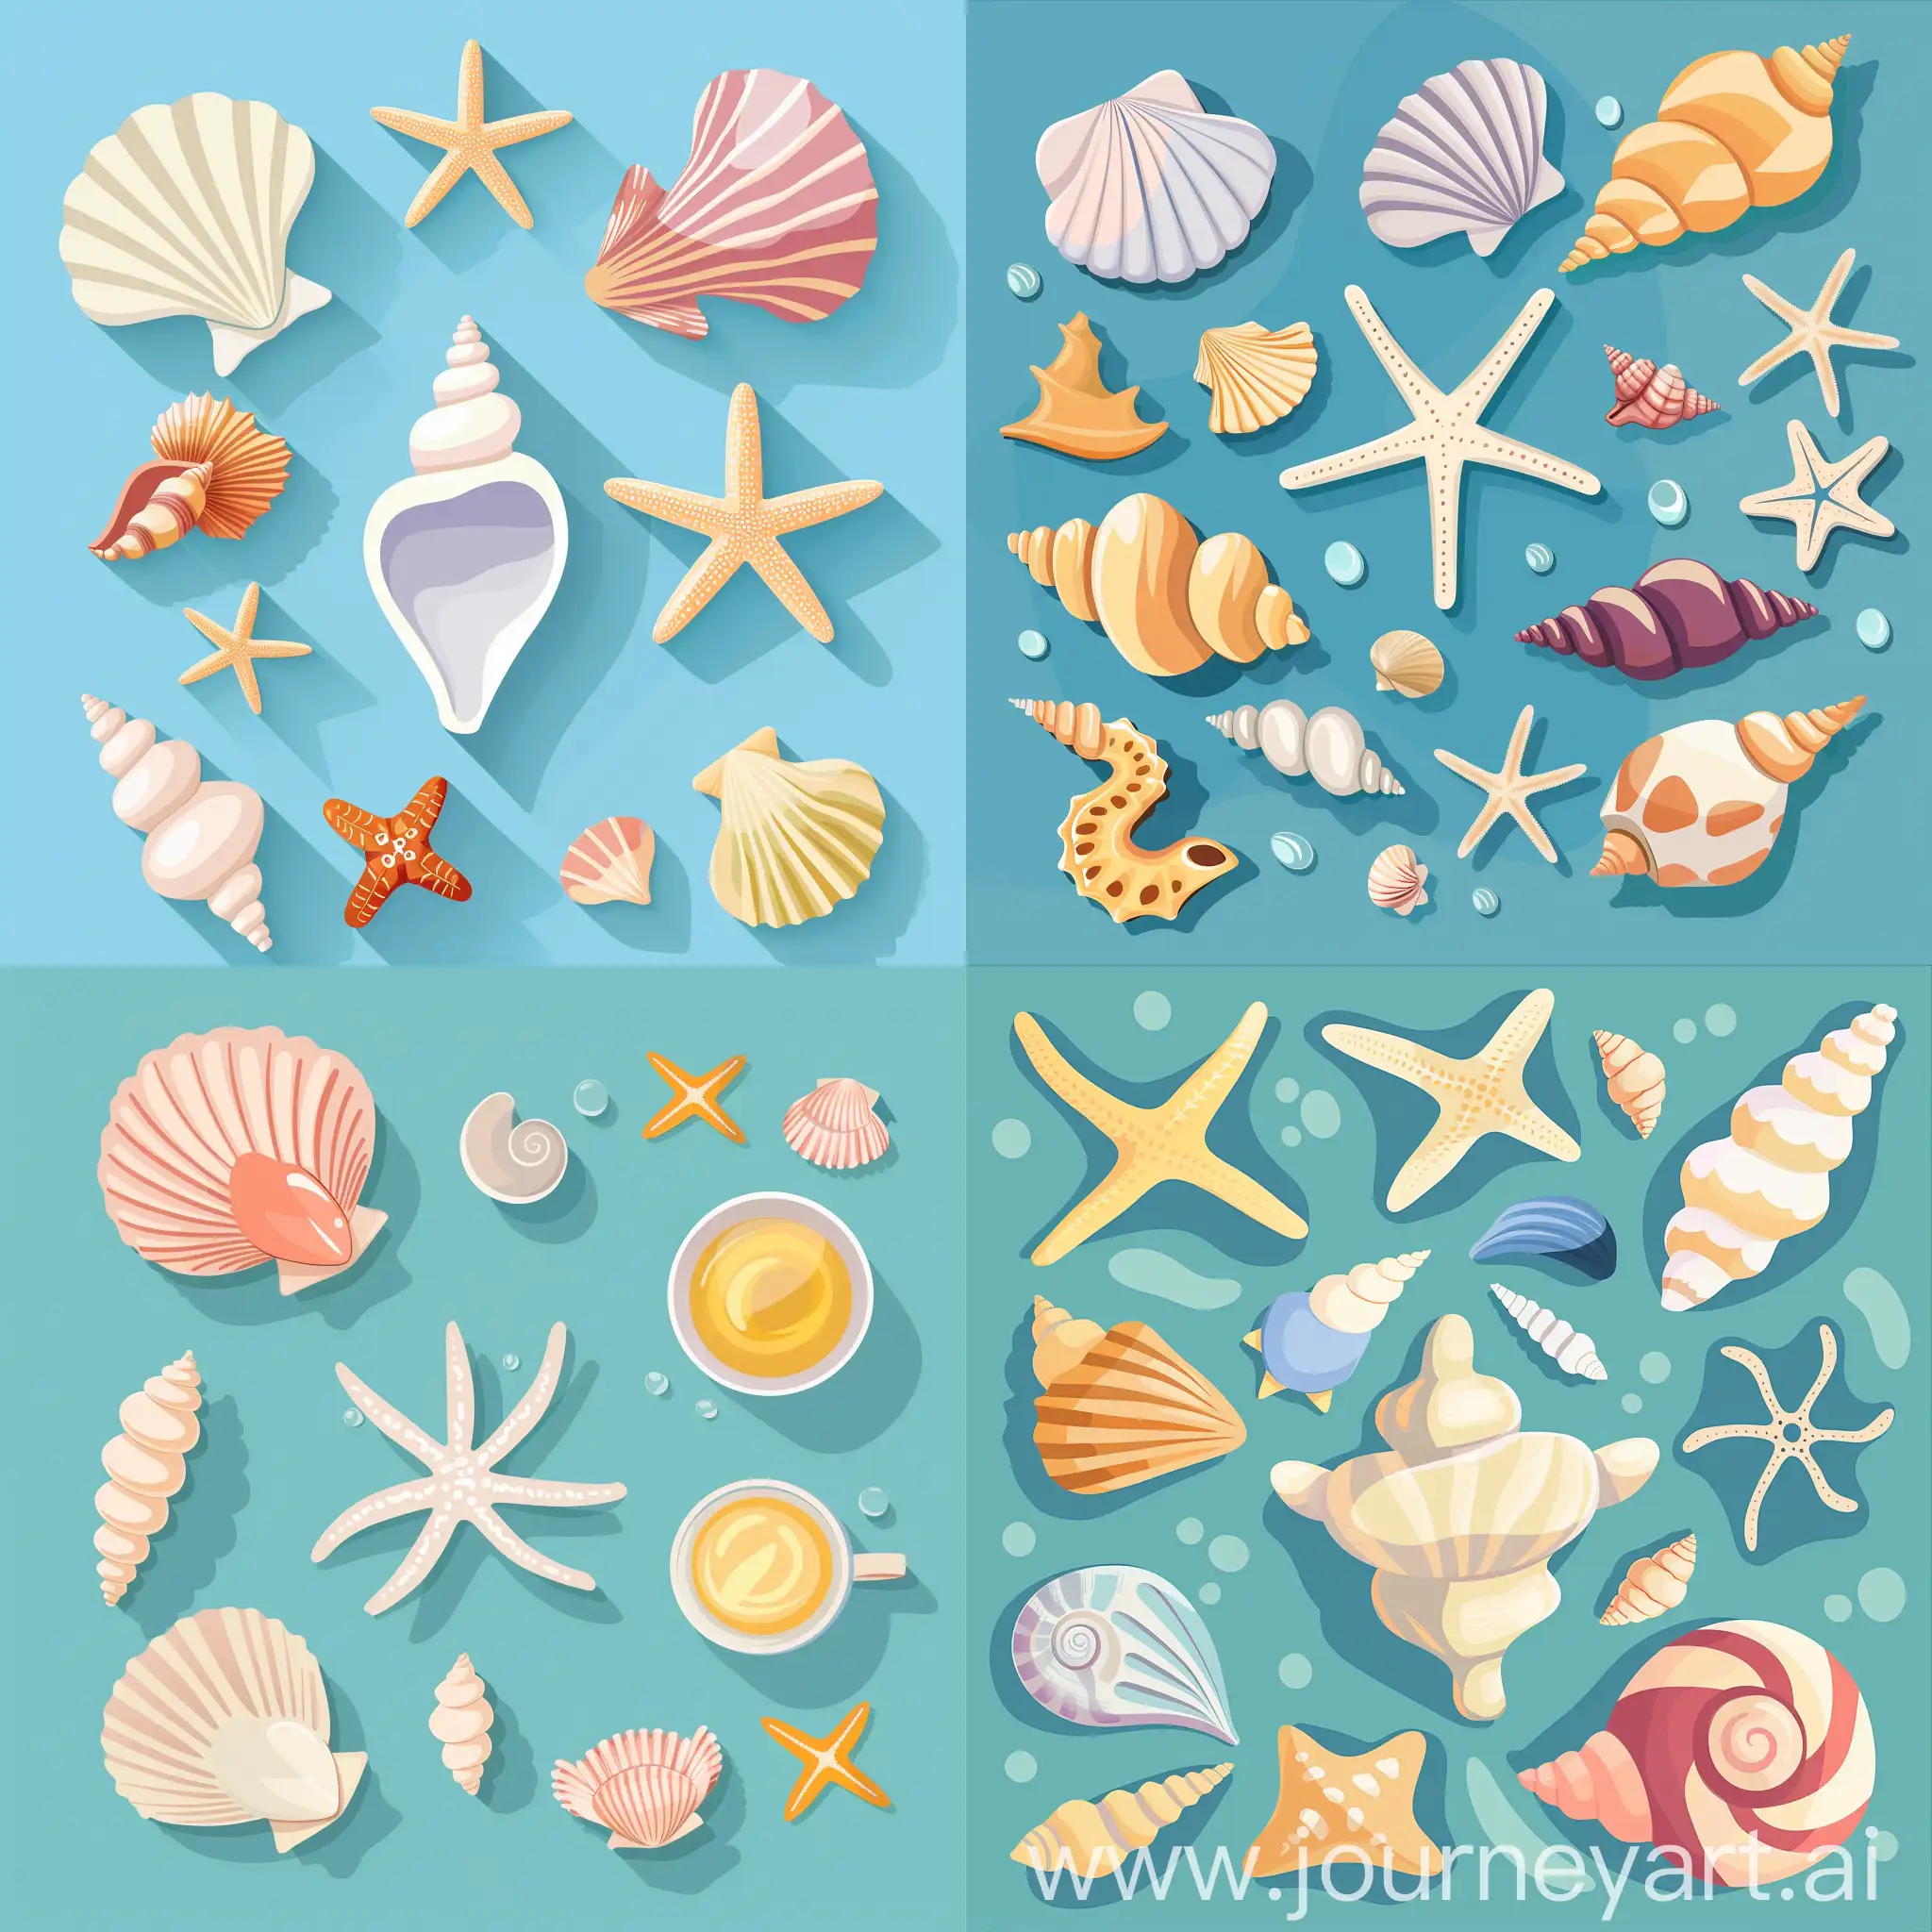 Beachside ambiance - nautical-themed decor with seashell objects image, in high quality flat style